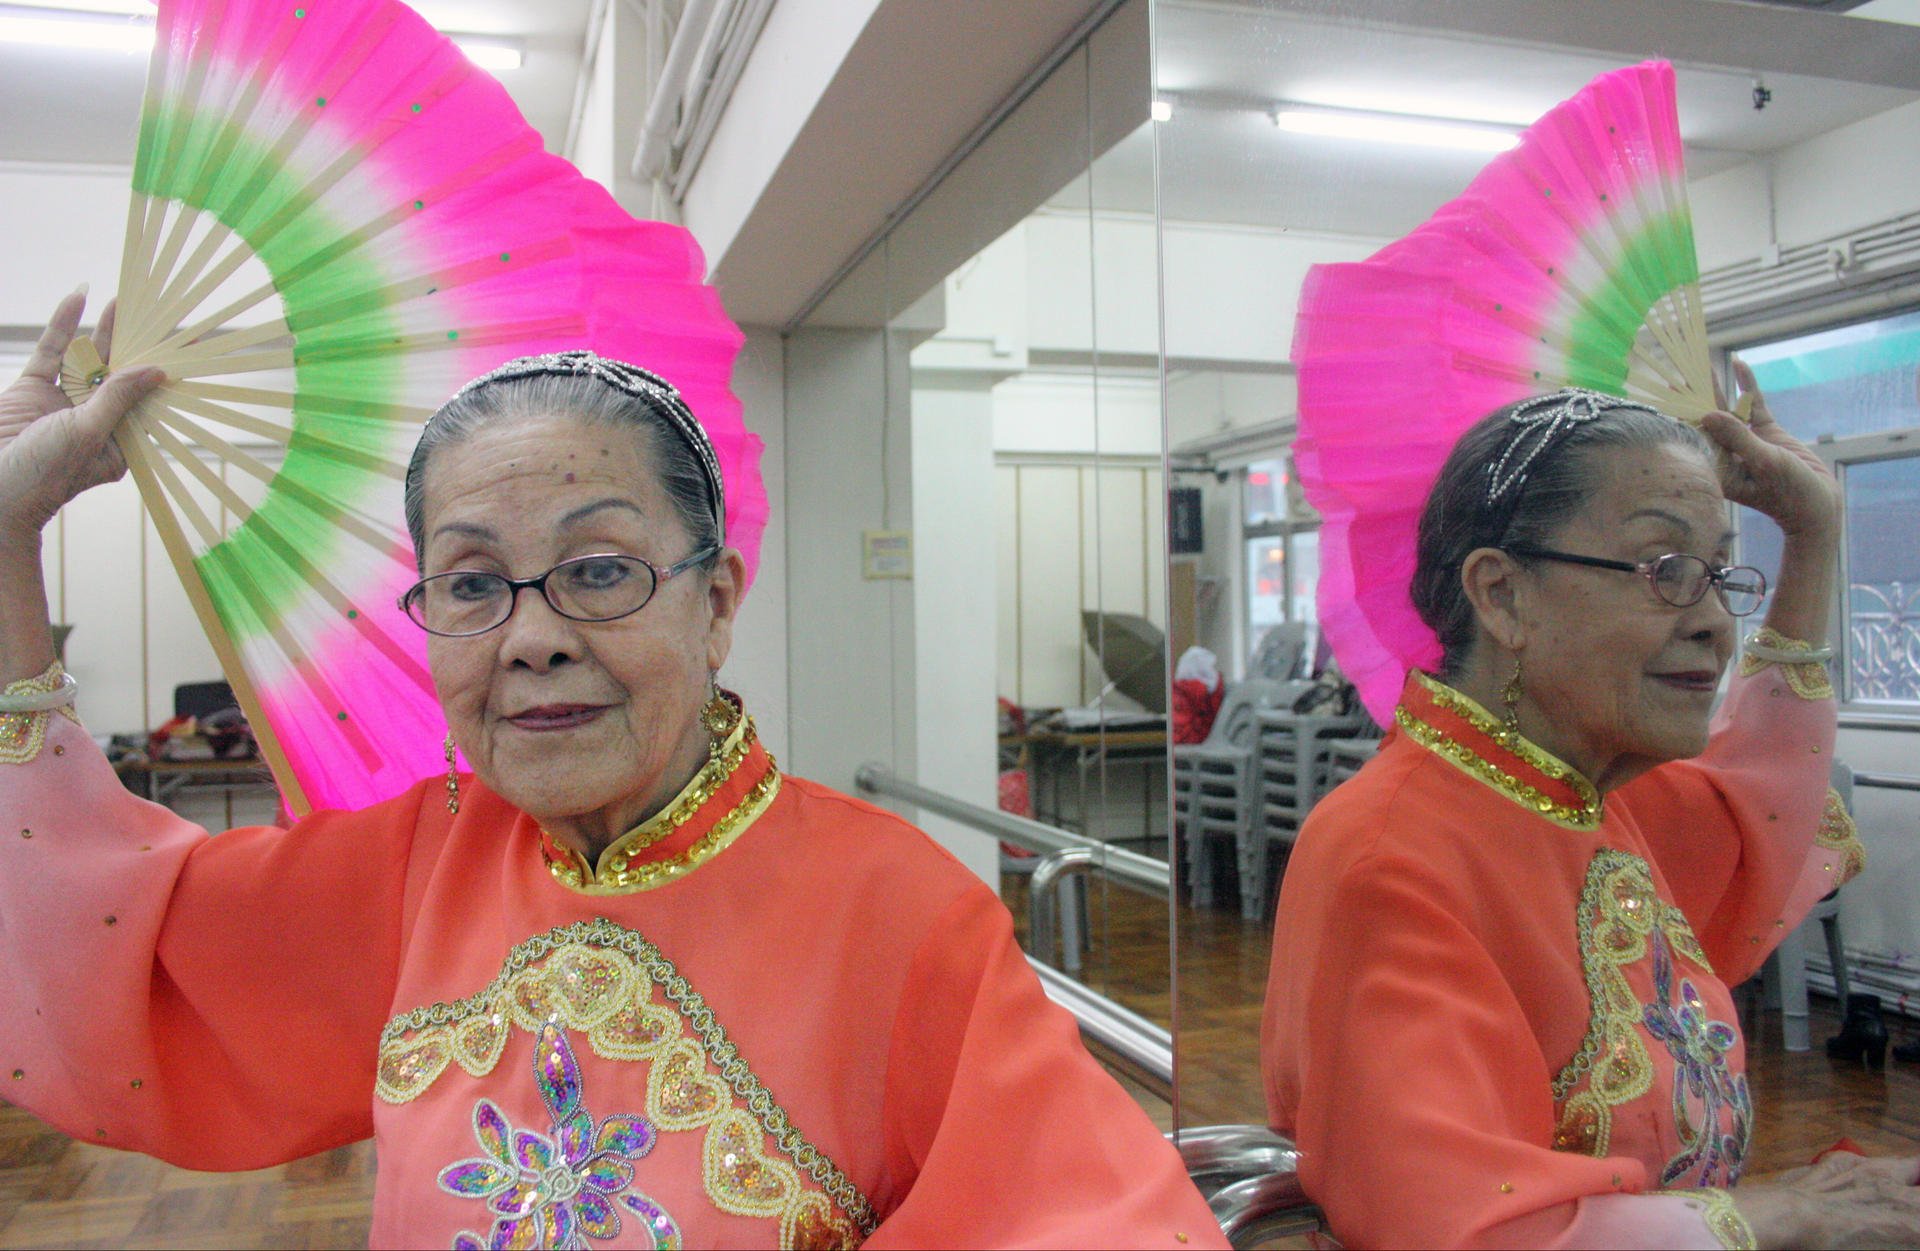 Nora Ng has been visiting care homes to perform dances for their elderly residents for 21 years. Photo: Annemarie Evans